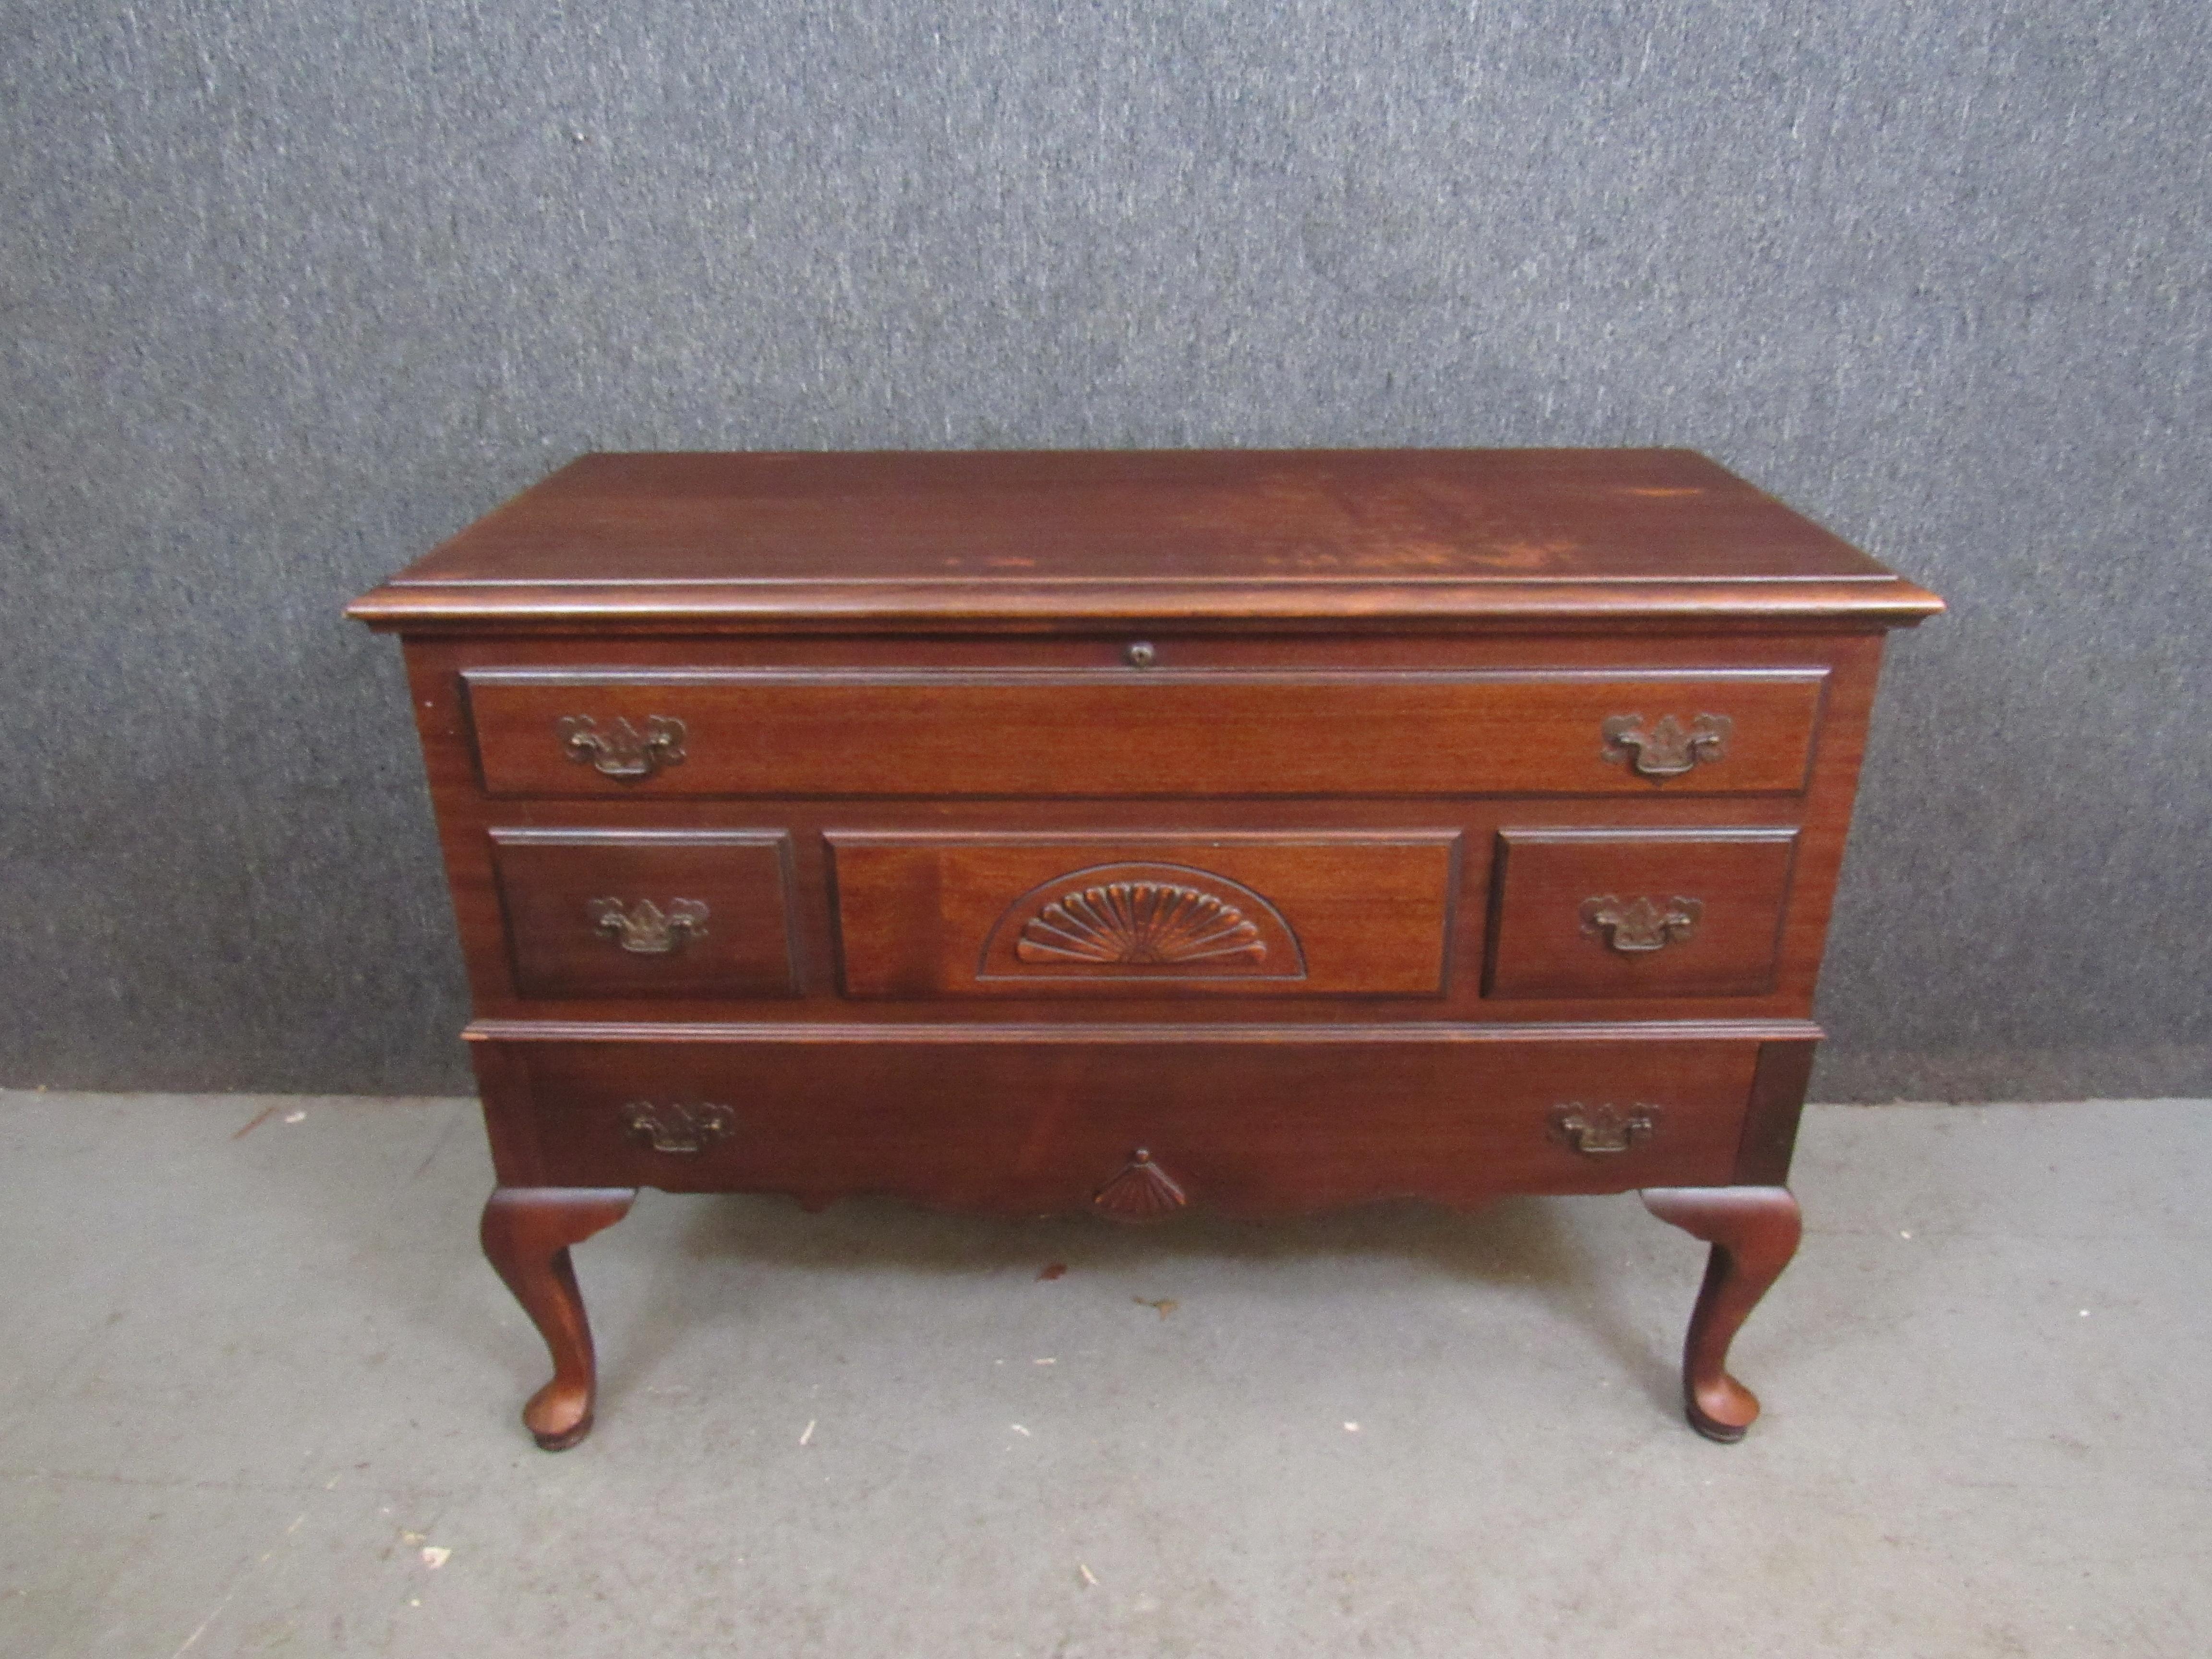 Simple yet ornate, this traditional cedar hope chest has all the features that made Virginia’s Lane Furniture one of the biggest names in 20th century American woodworking. Built in the antique Queen Anne style, a rich red mahogany is highlighted by